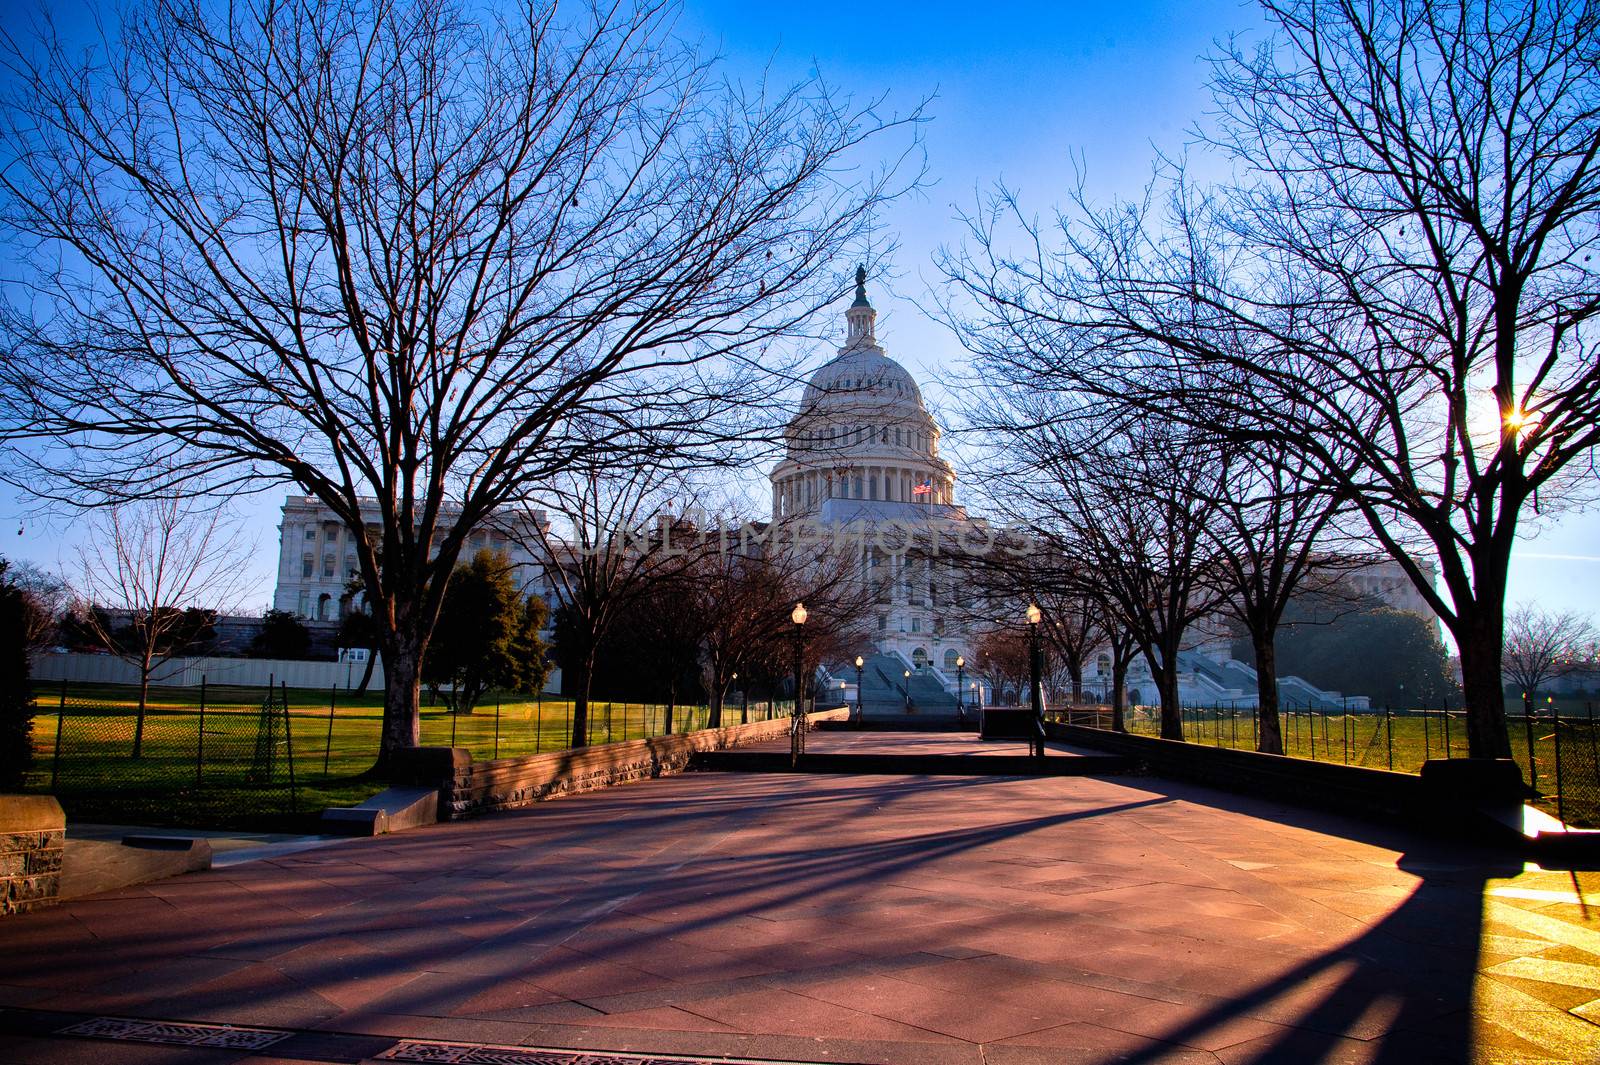 The United States Capitol building in Washington DC.